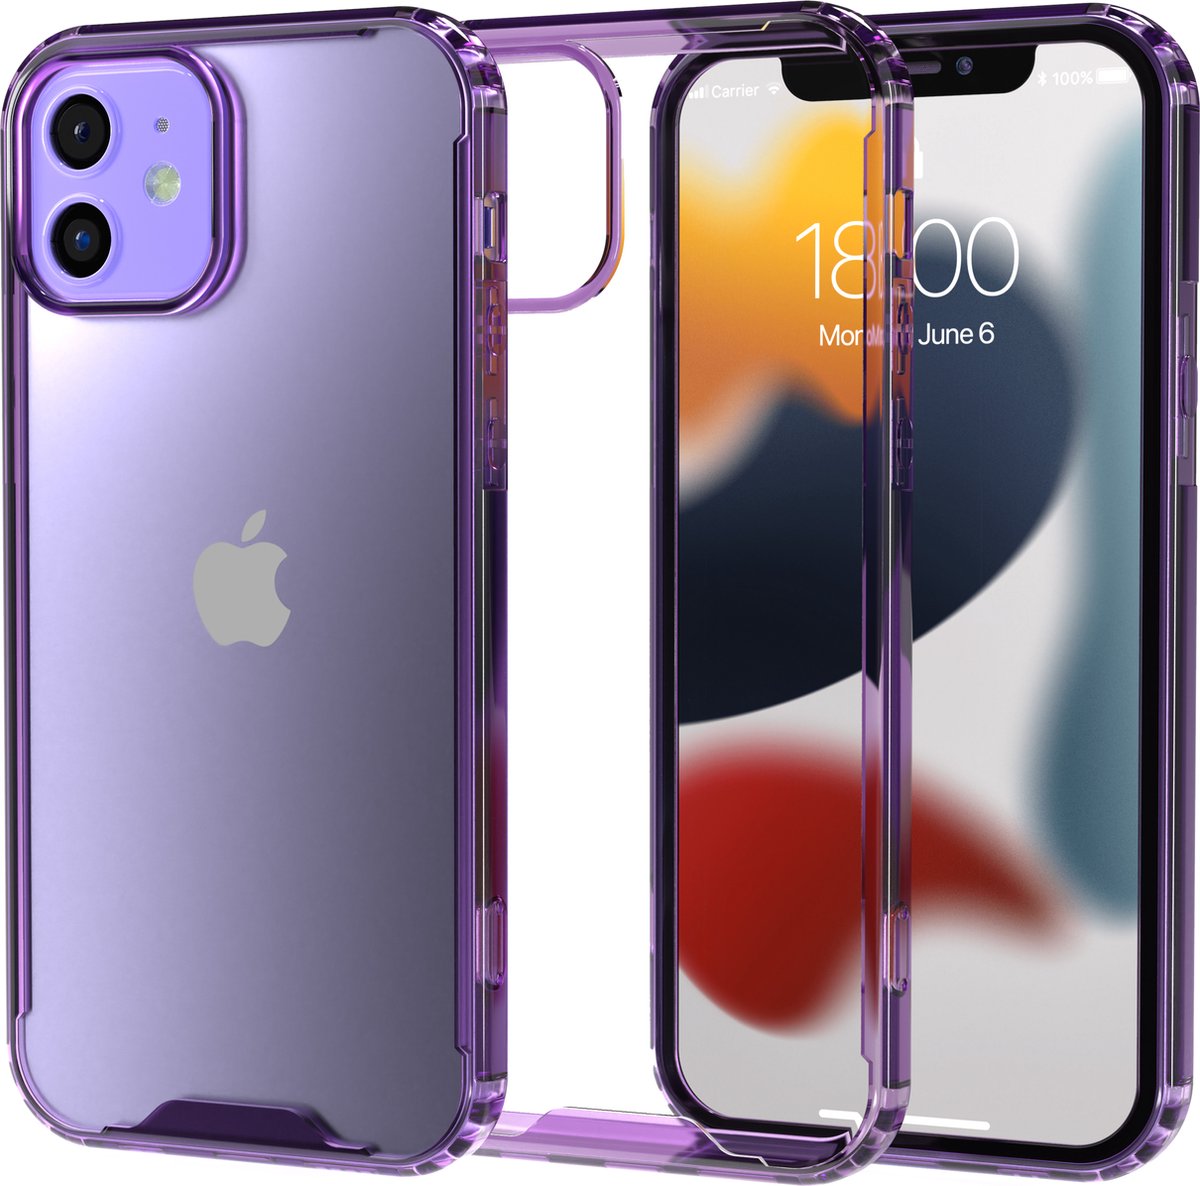 Hoesje geschikt voor iPhone 12 hoes paars hybrid transparant - iPhone 12 Pro Tpu/Pc hard case paars transparant